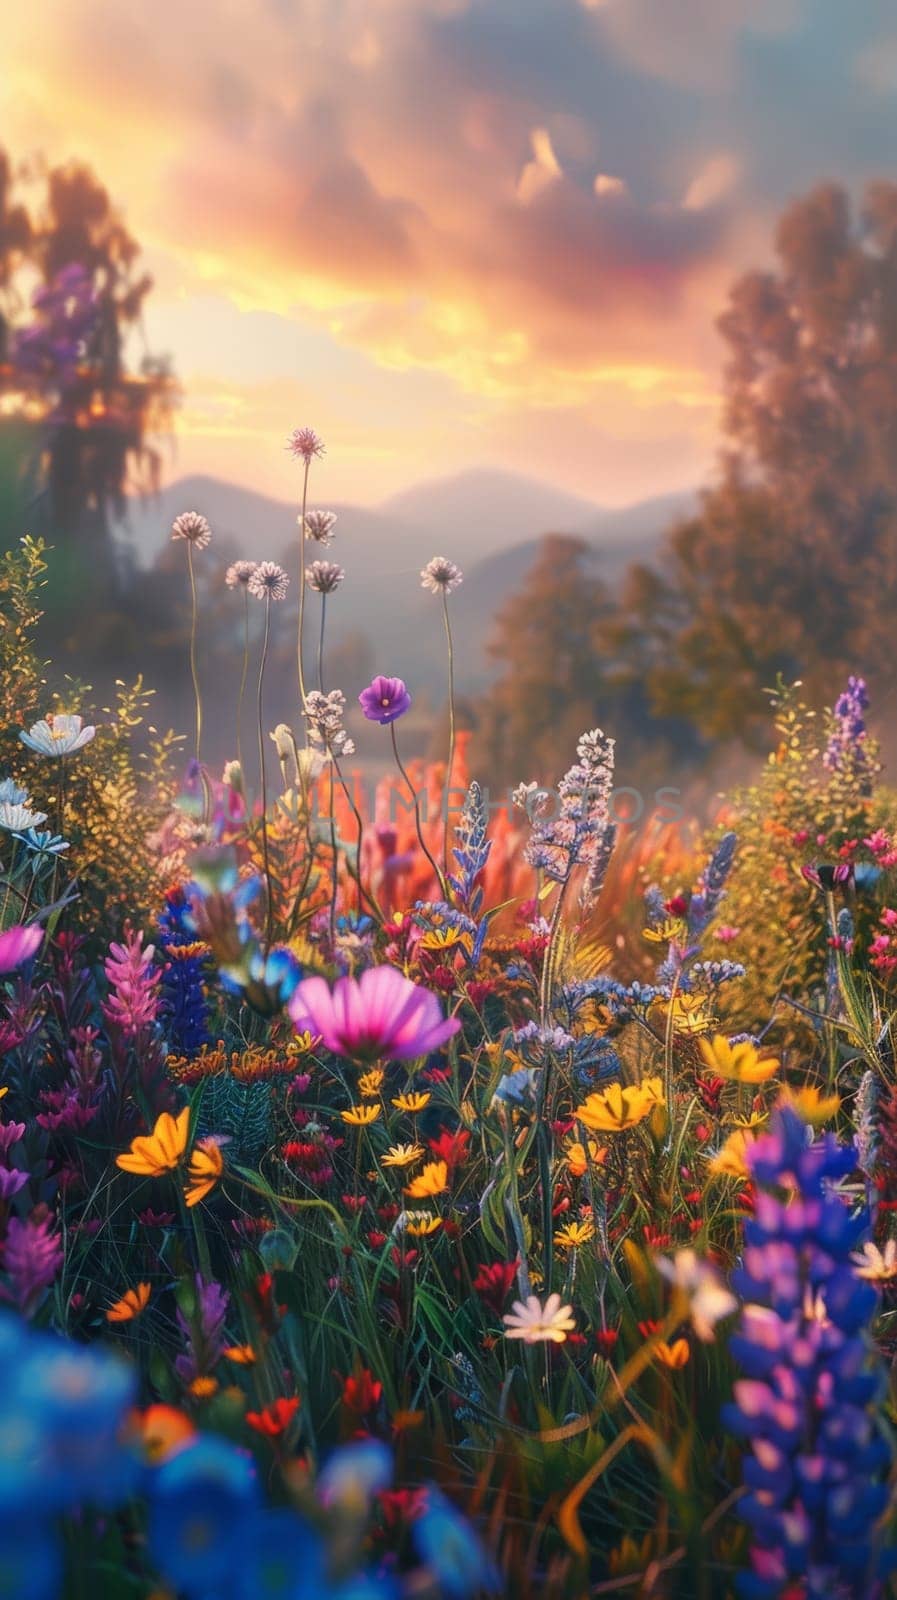 Twilight descends on a field of wildflowers, the delicate petals illuminated by the last rays of the days sunlight